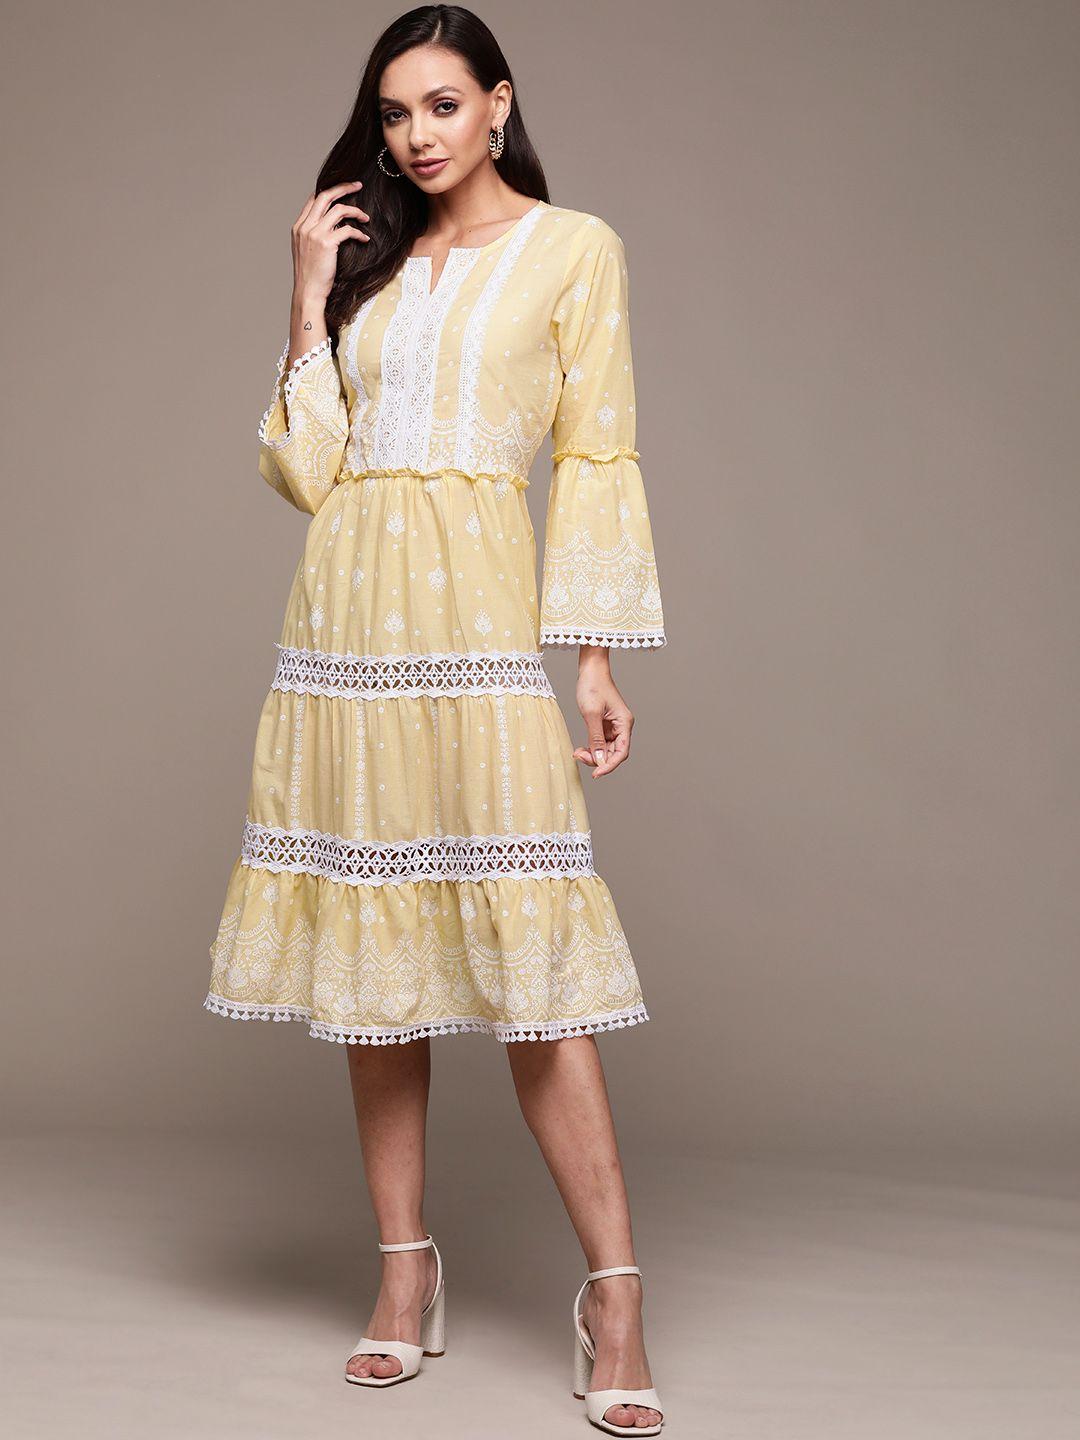 ishin yellow & white floral embroidered a-line dress